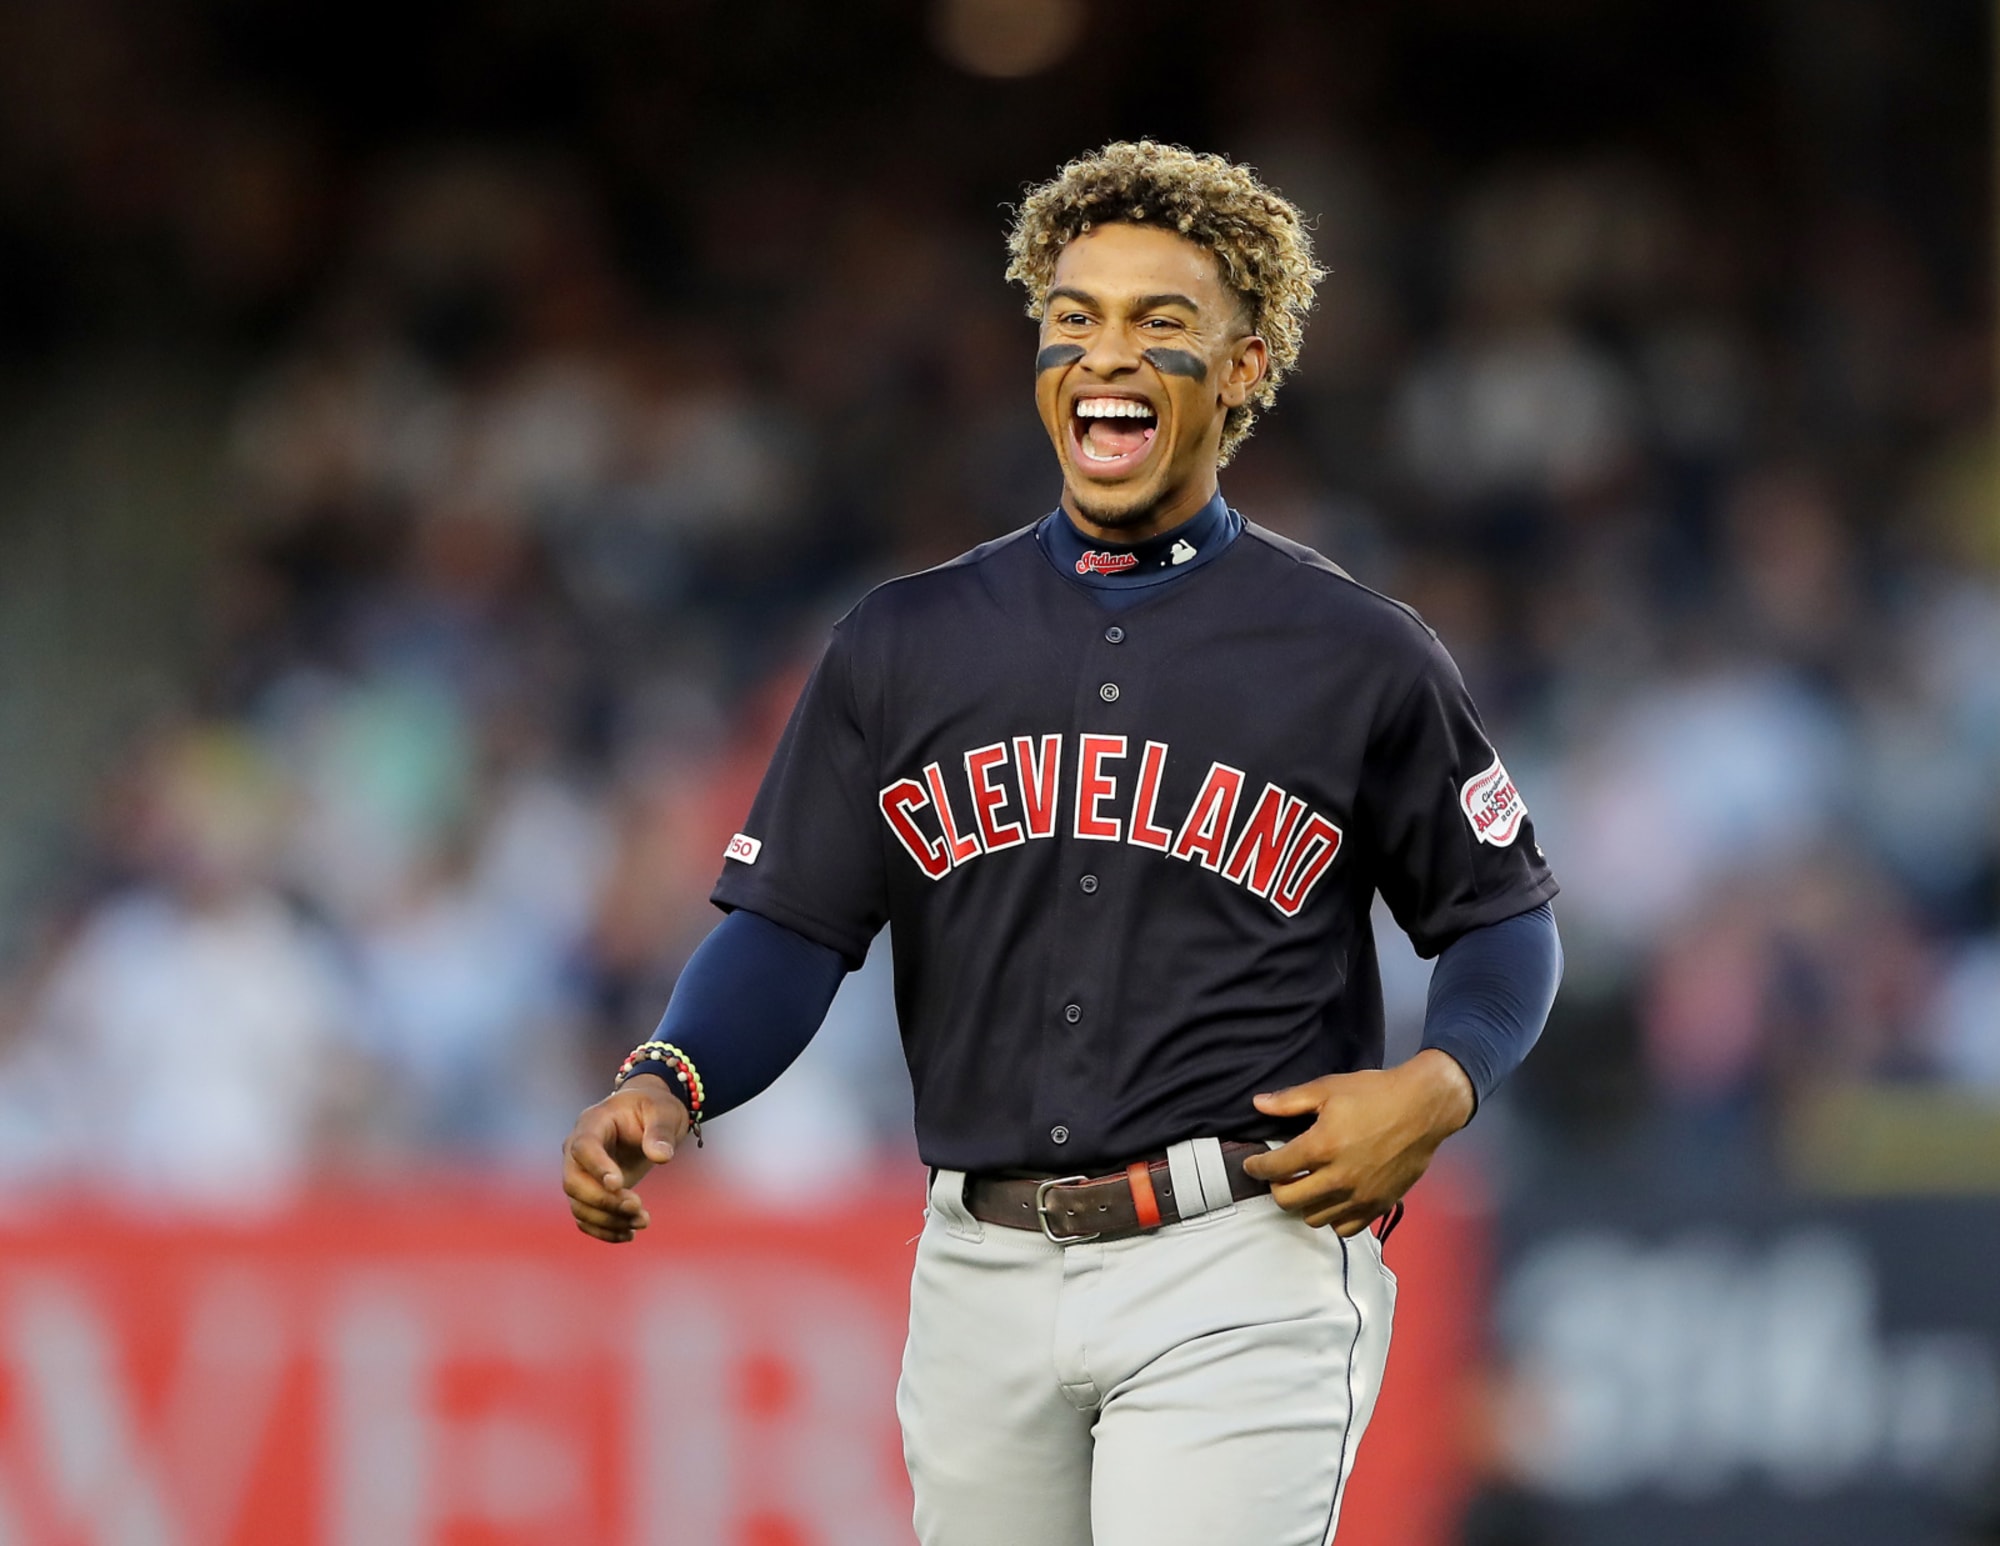 If the Dodgers get Francisco Lindor, the Yankees should be all